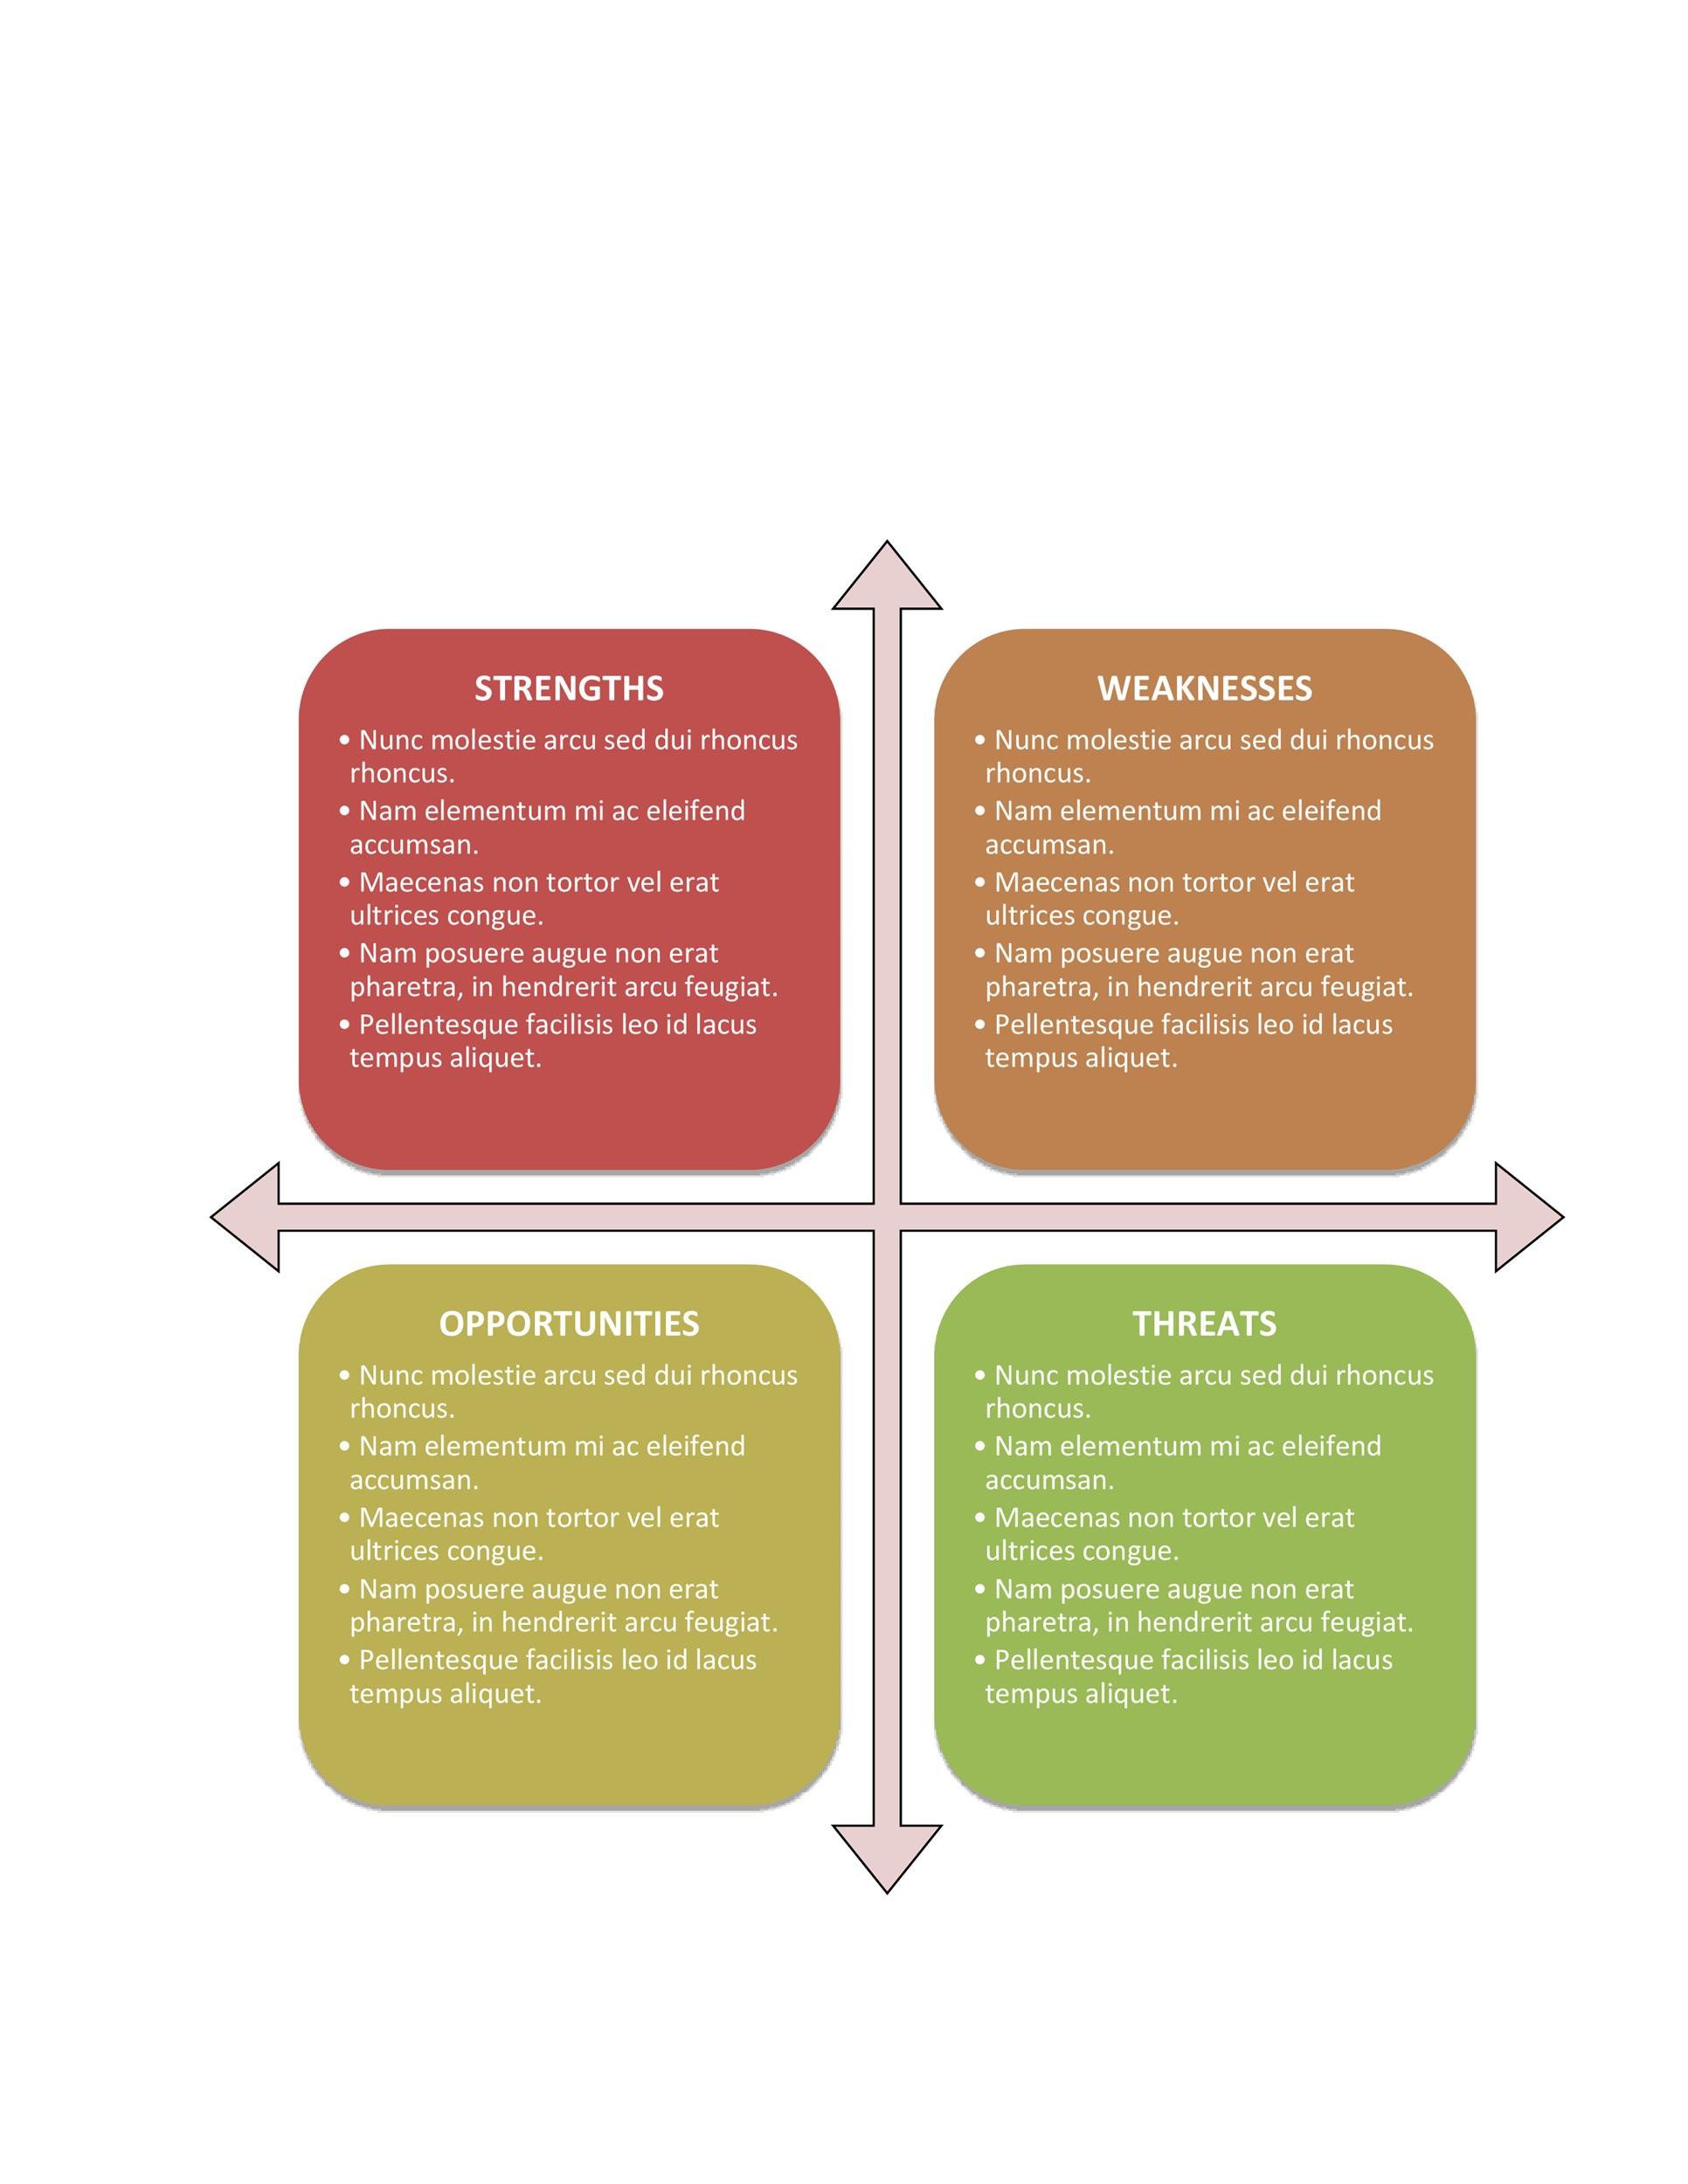 Swot analysis template download | bplans